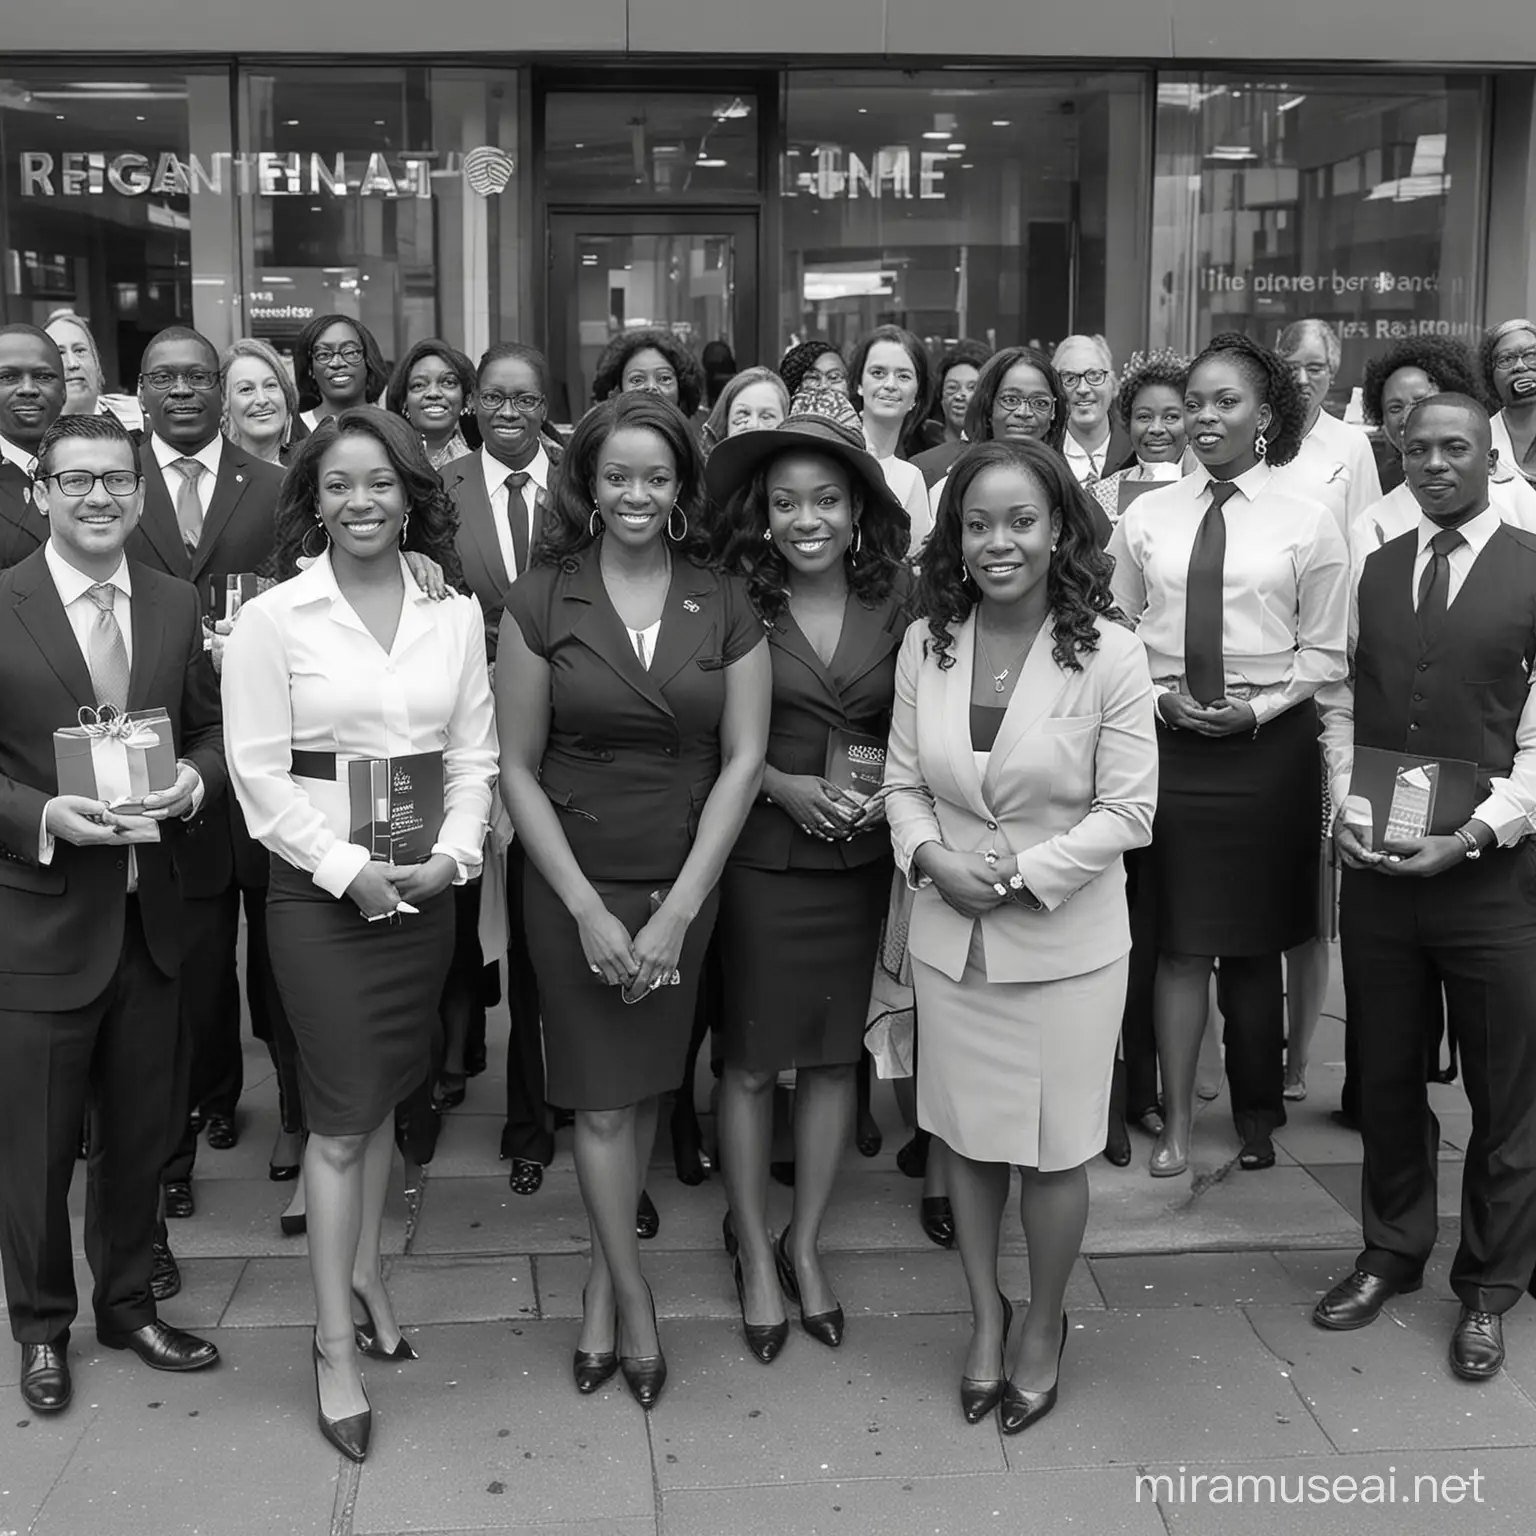 Regenerate me white and black women's bank agents and also well-dressed black and white men at a ceremony where they give gifts to their bank's customers during a special event on the bank's premises.